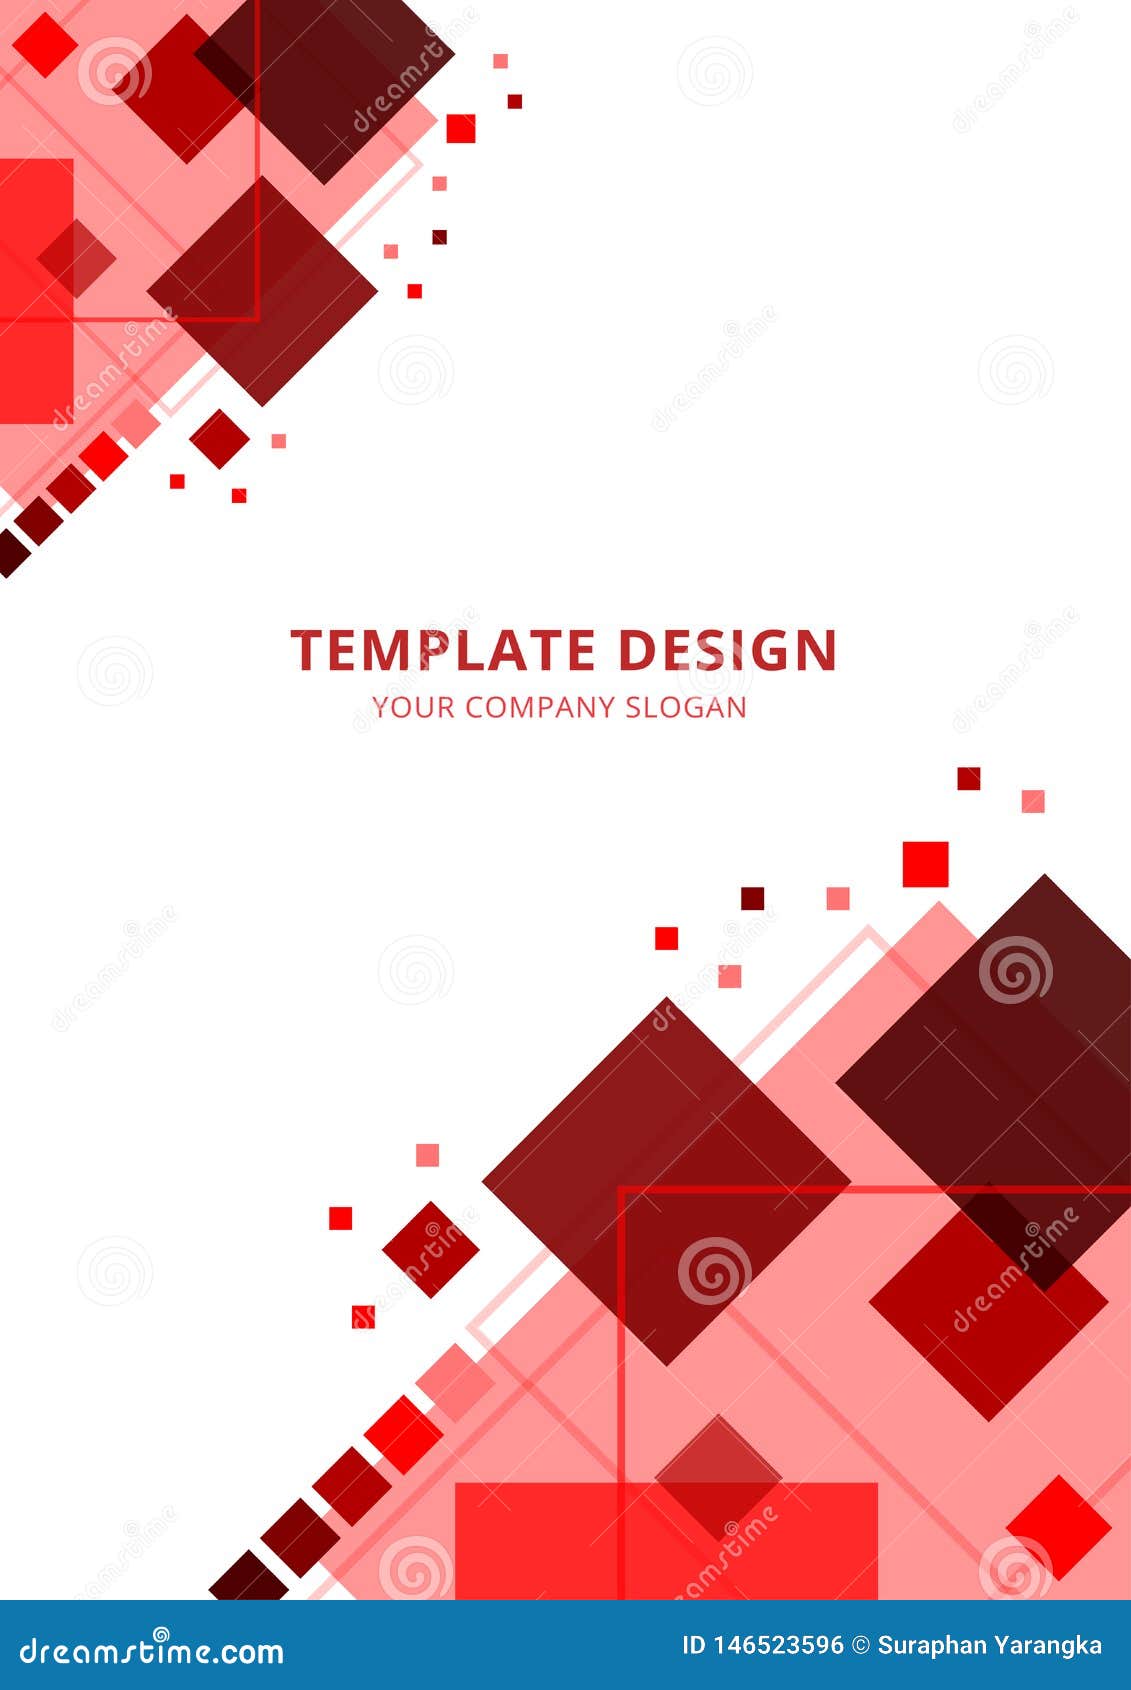 Red Background Vector Art  Graphics  freevectorcom